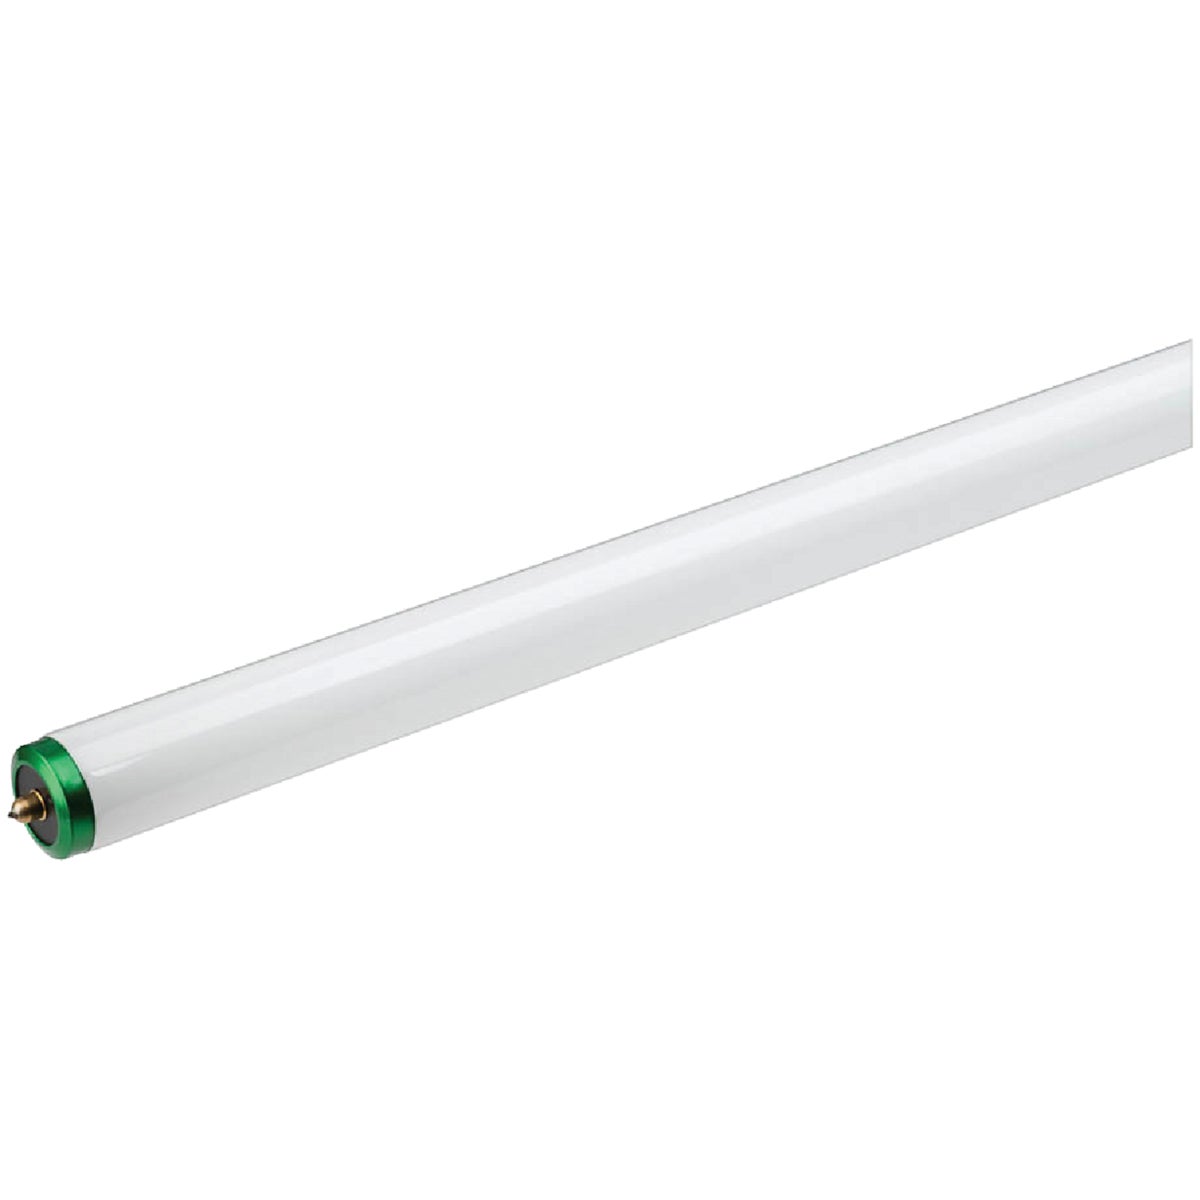 Philips 75W 96 In. Daylight Deluxe T12 Single Pin Fluorescent Tube Light Bulb (2-Pack)